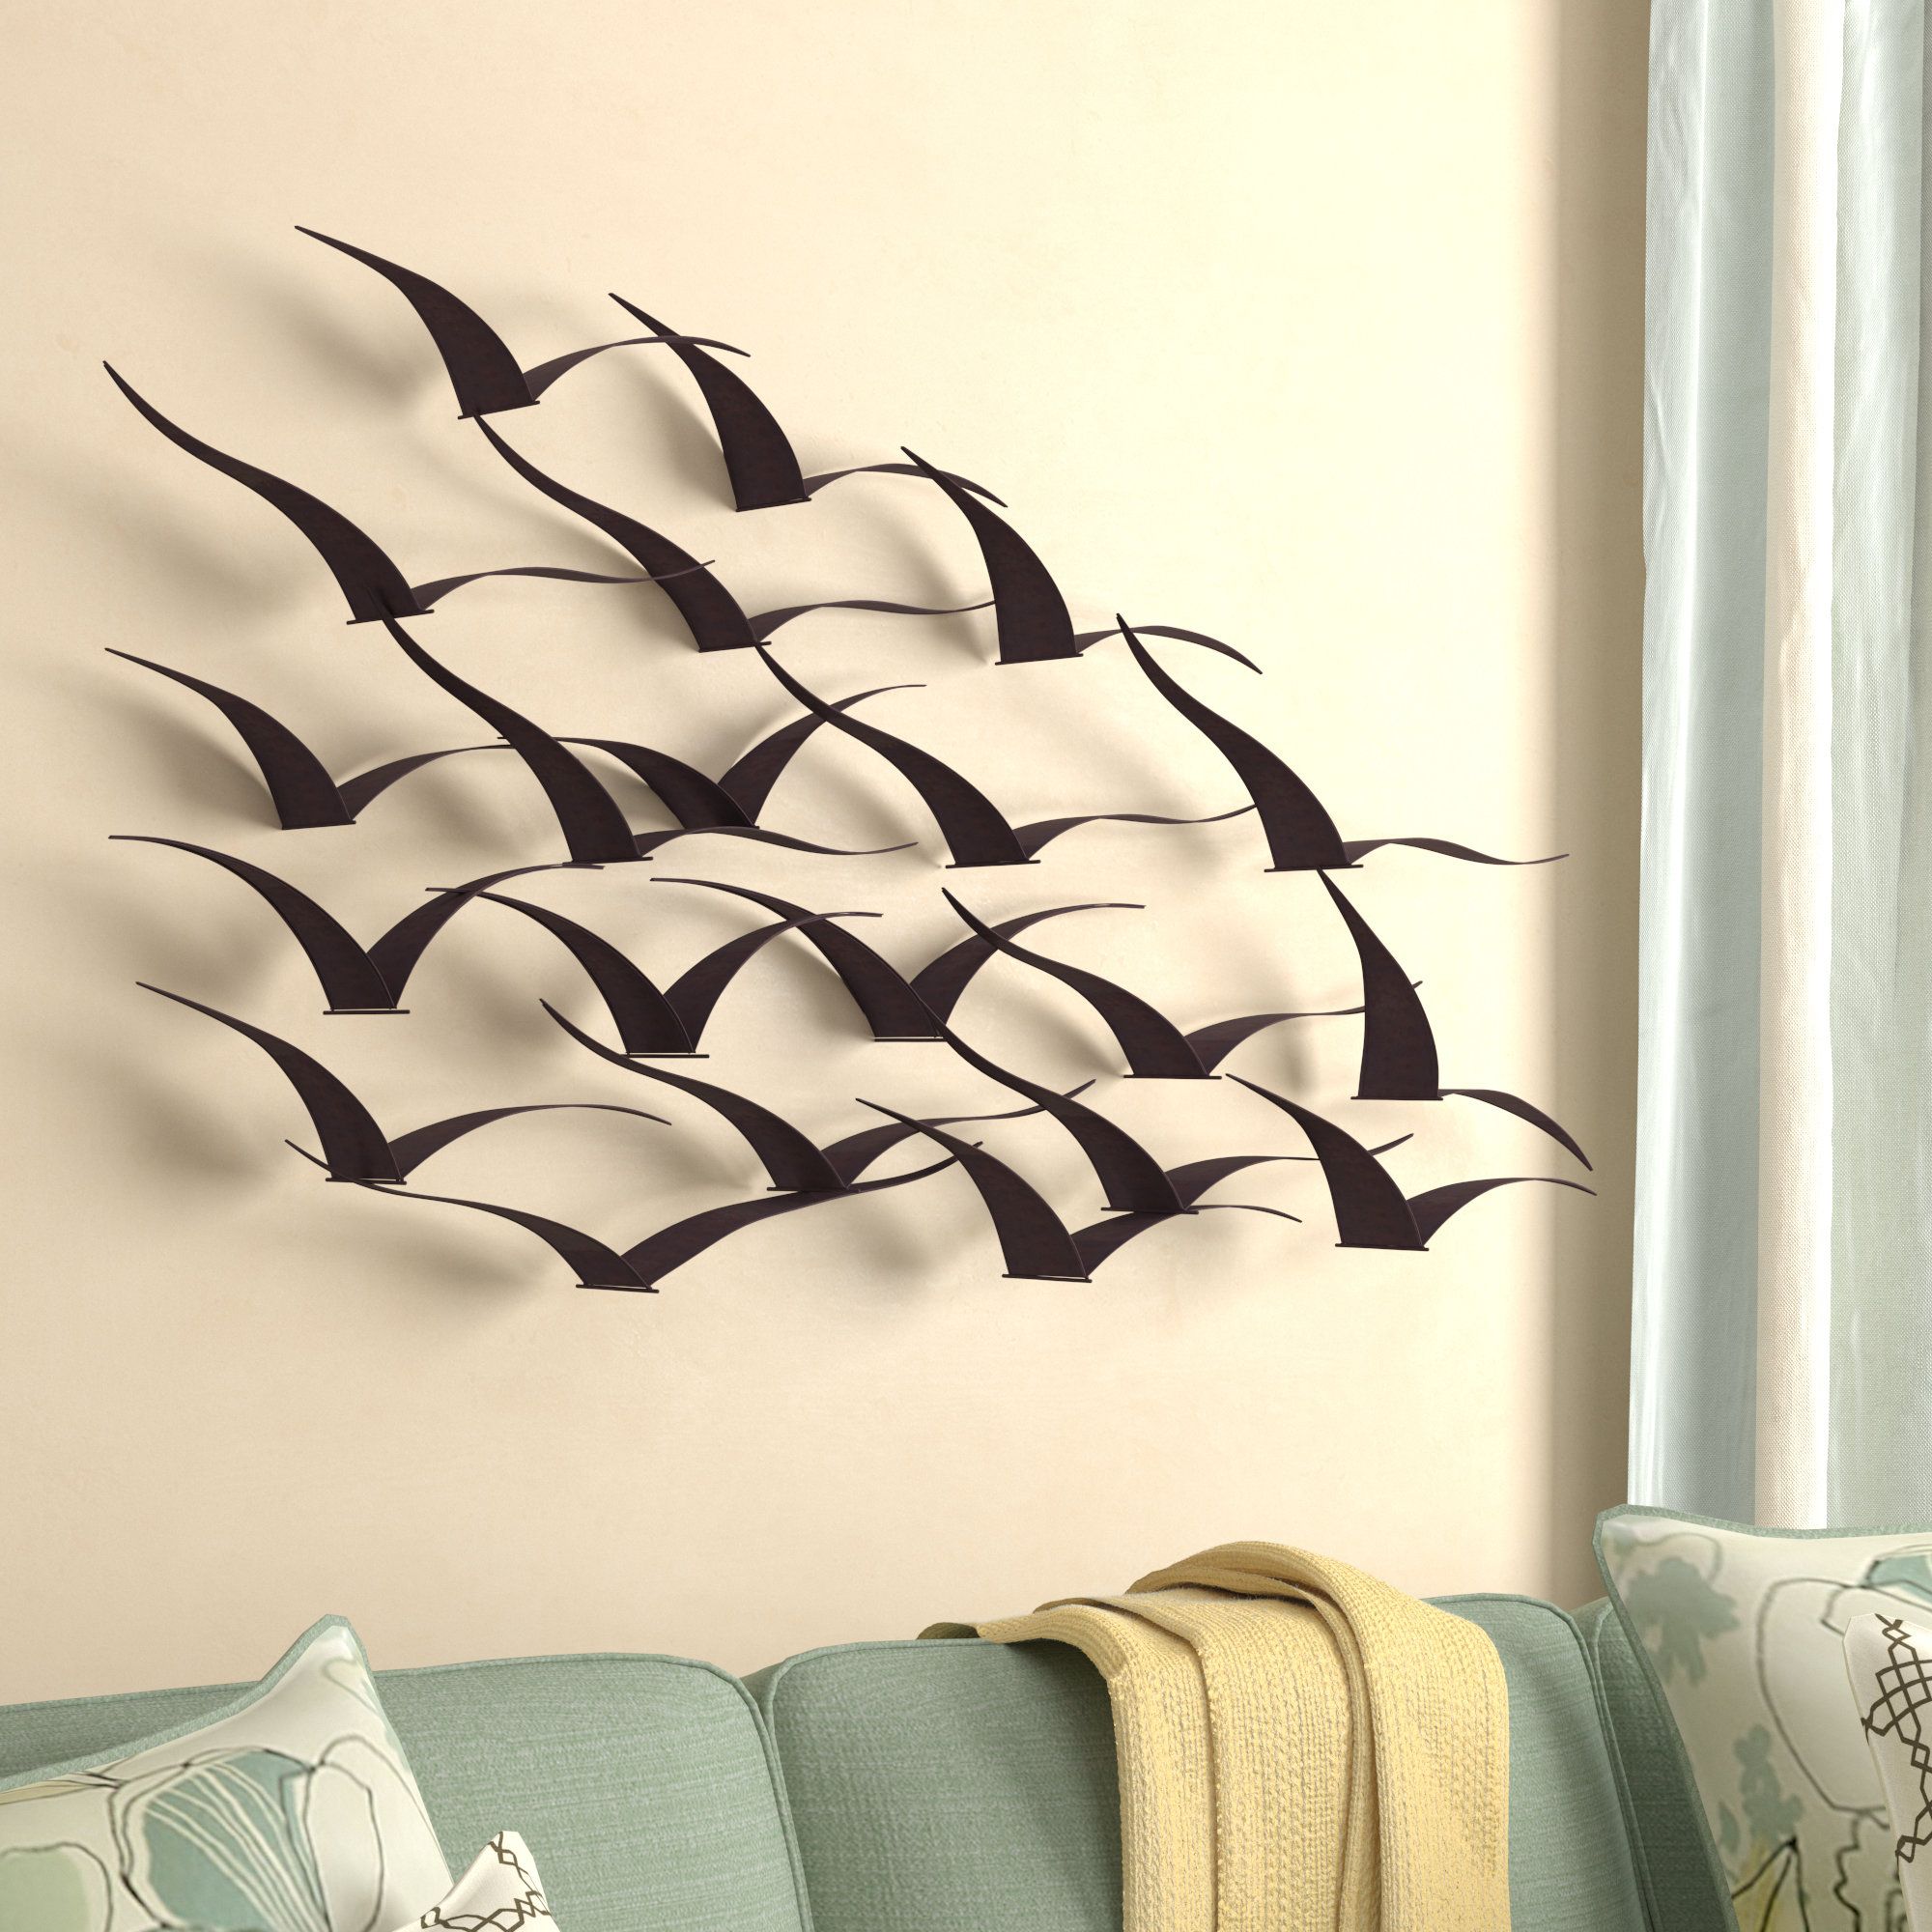 Metal Bird Wall Decor You'll Love In 2021 – Visualhunt Inside Best And Newest Flock Wall Art (View 3 of 20)